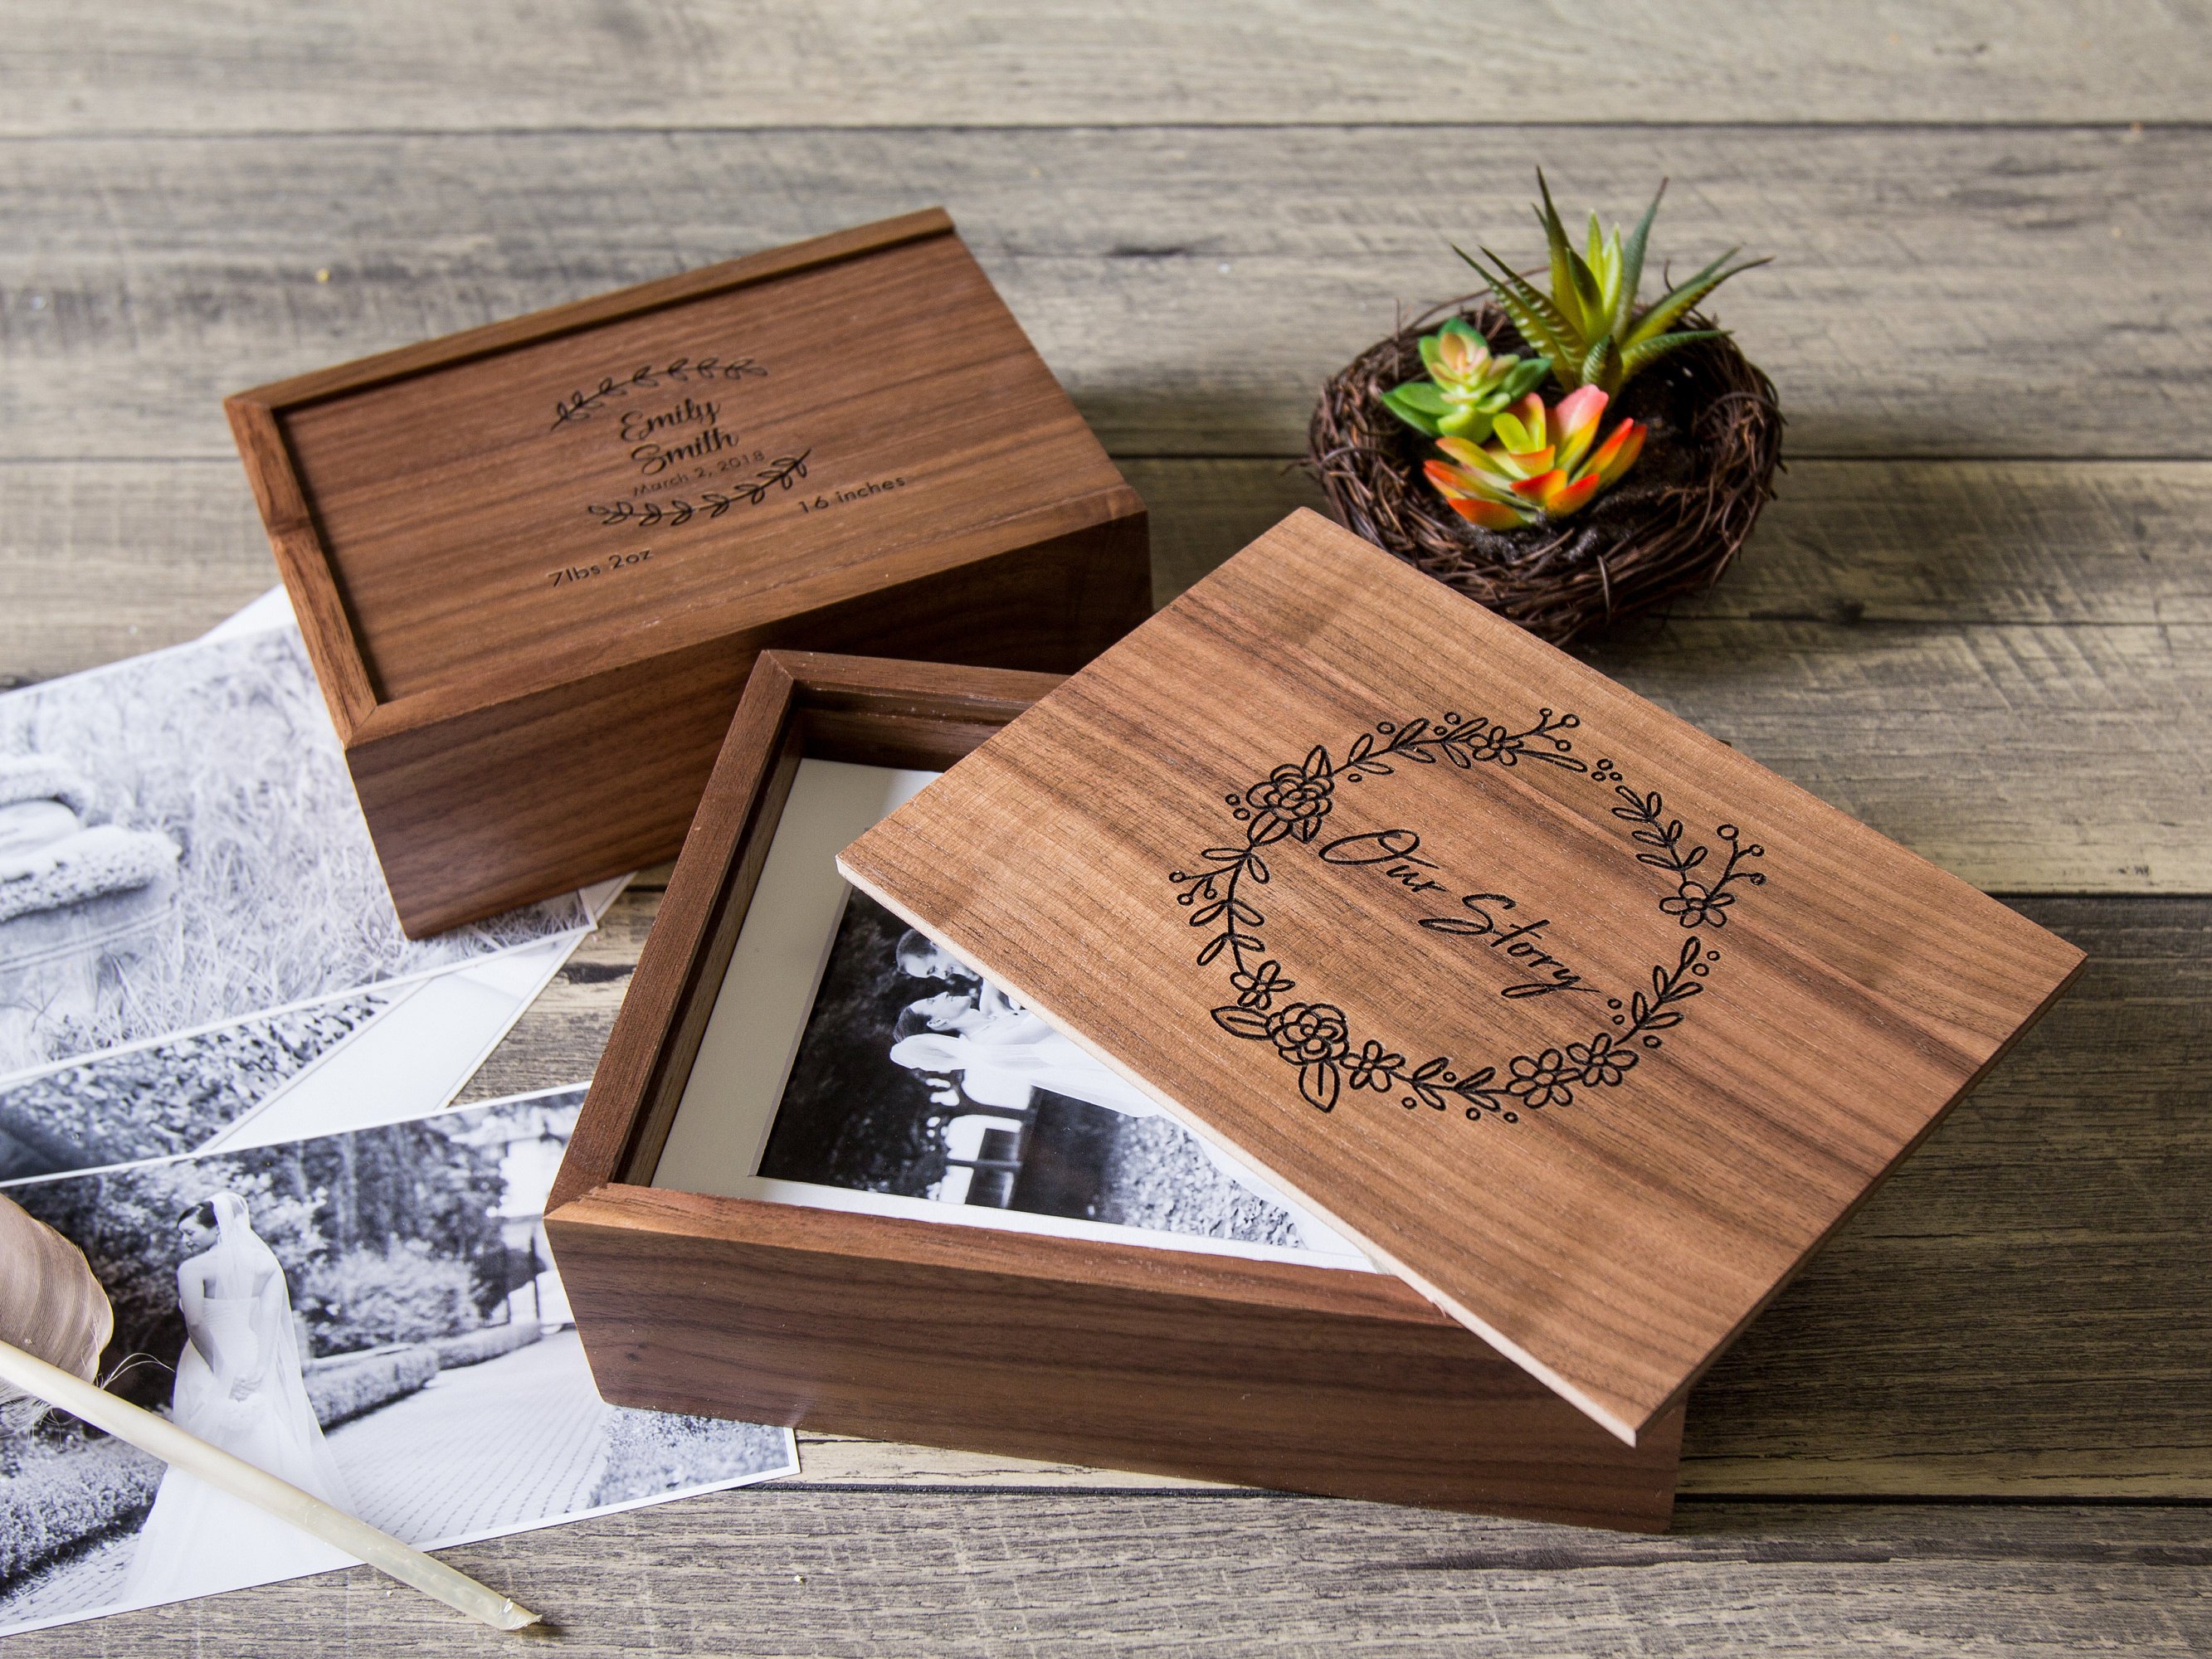 Engraved Wedding Memory Box for Photos, Personalized Wooden Box for 4x6 or  5x7 Photos and Cards, Walnut or Maple Wood Gift Box — Hurd & Honey